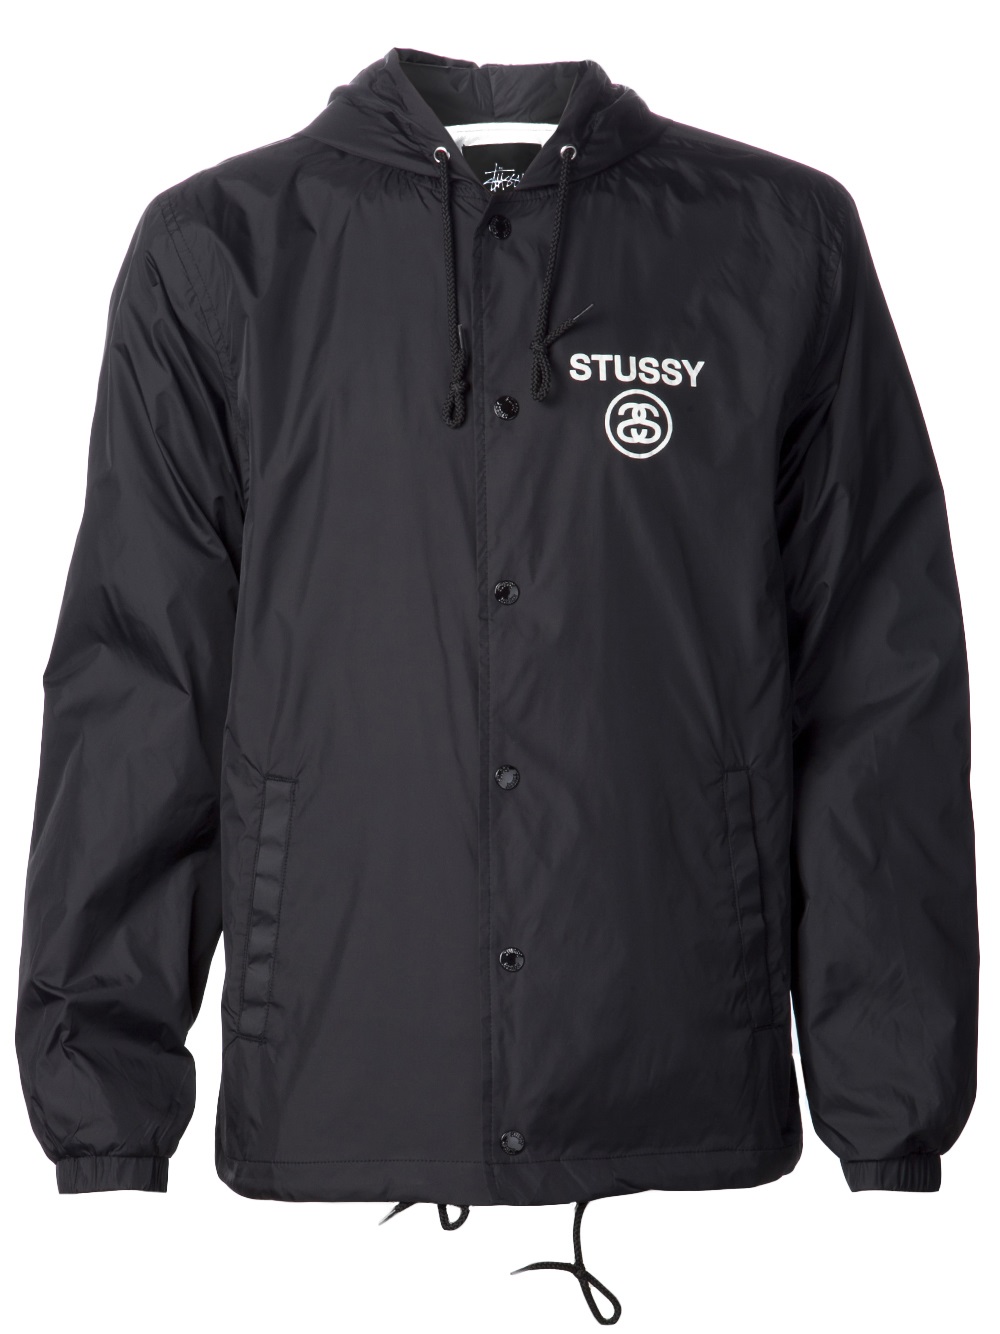 Stussy Hooded Coaches Jacket in Black for Men - Lyst